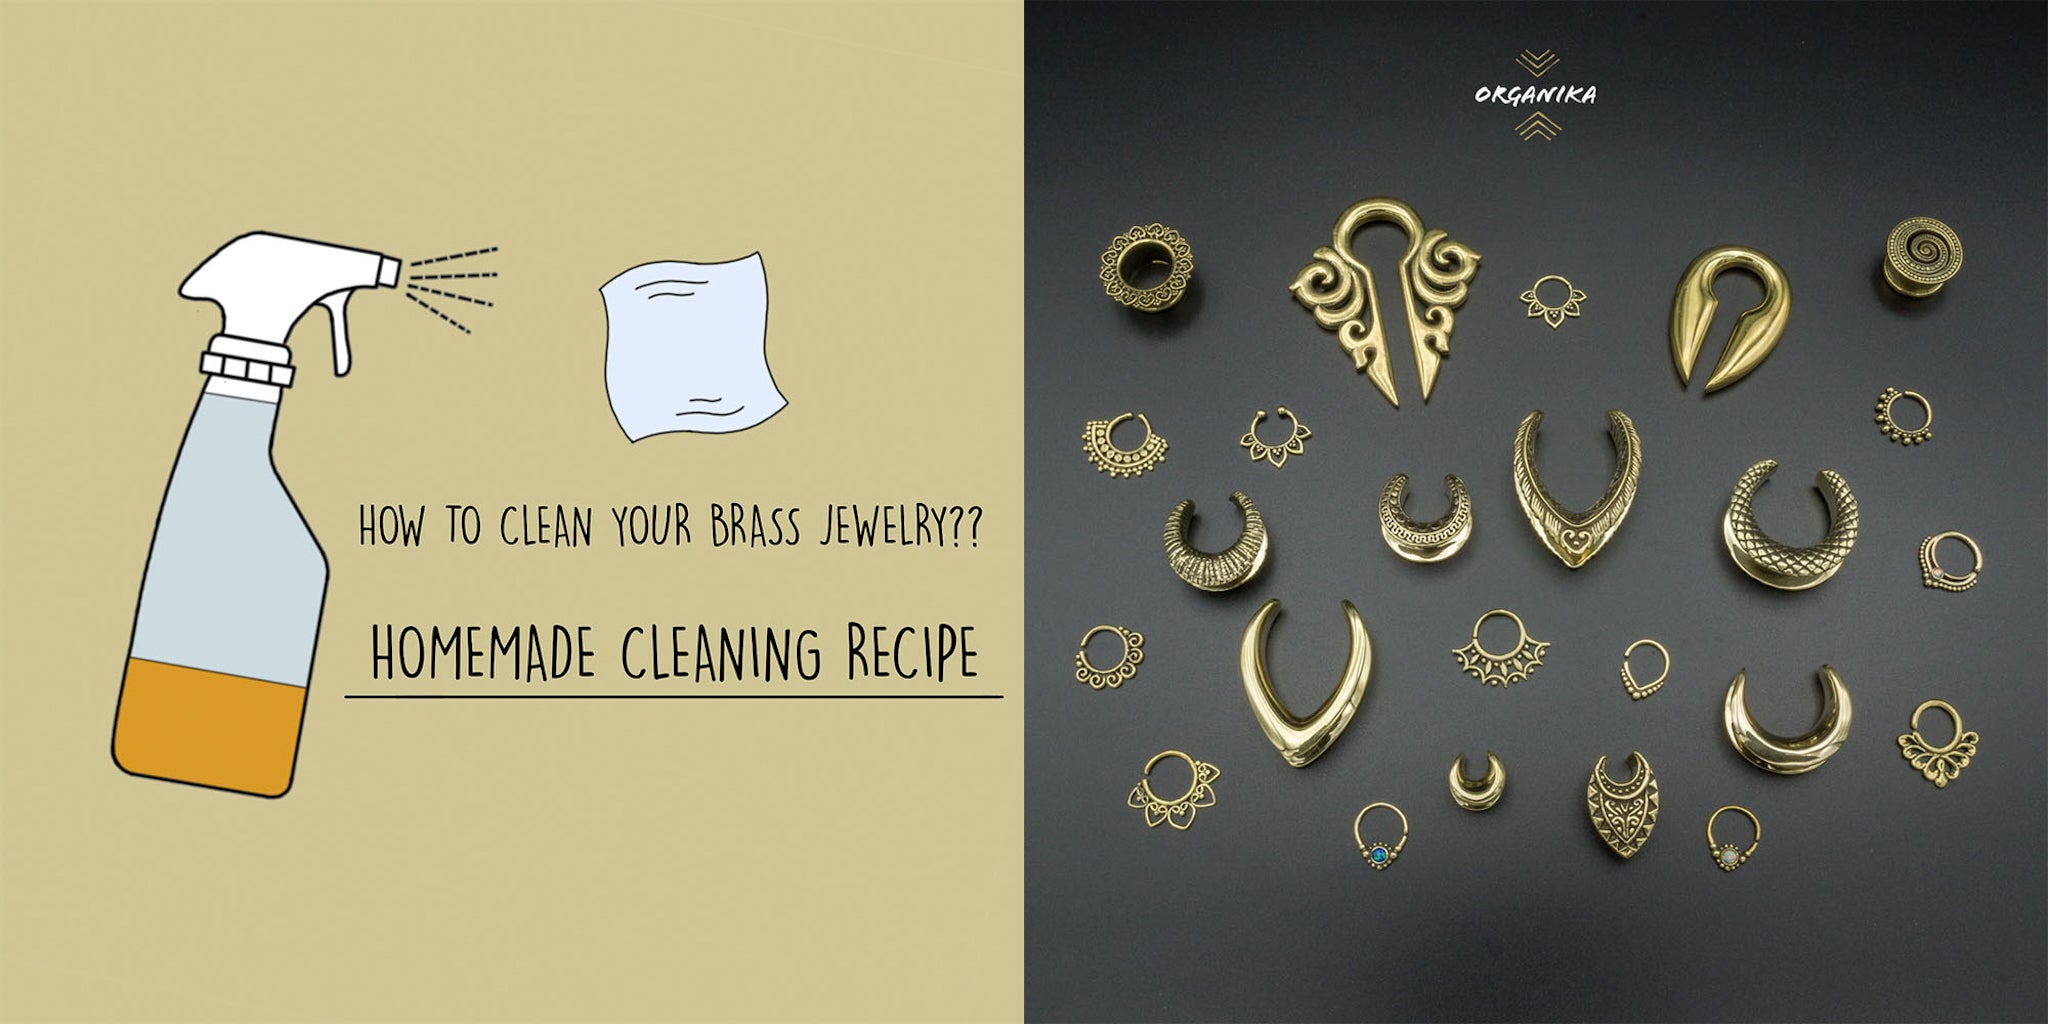 About Brass Metal & How to clean Brass Jewelry